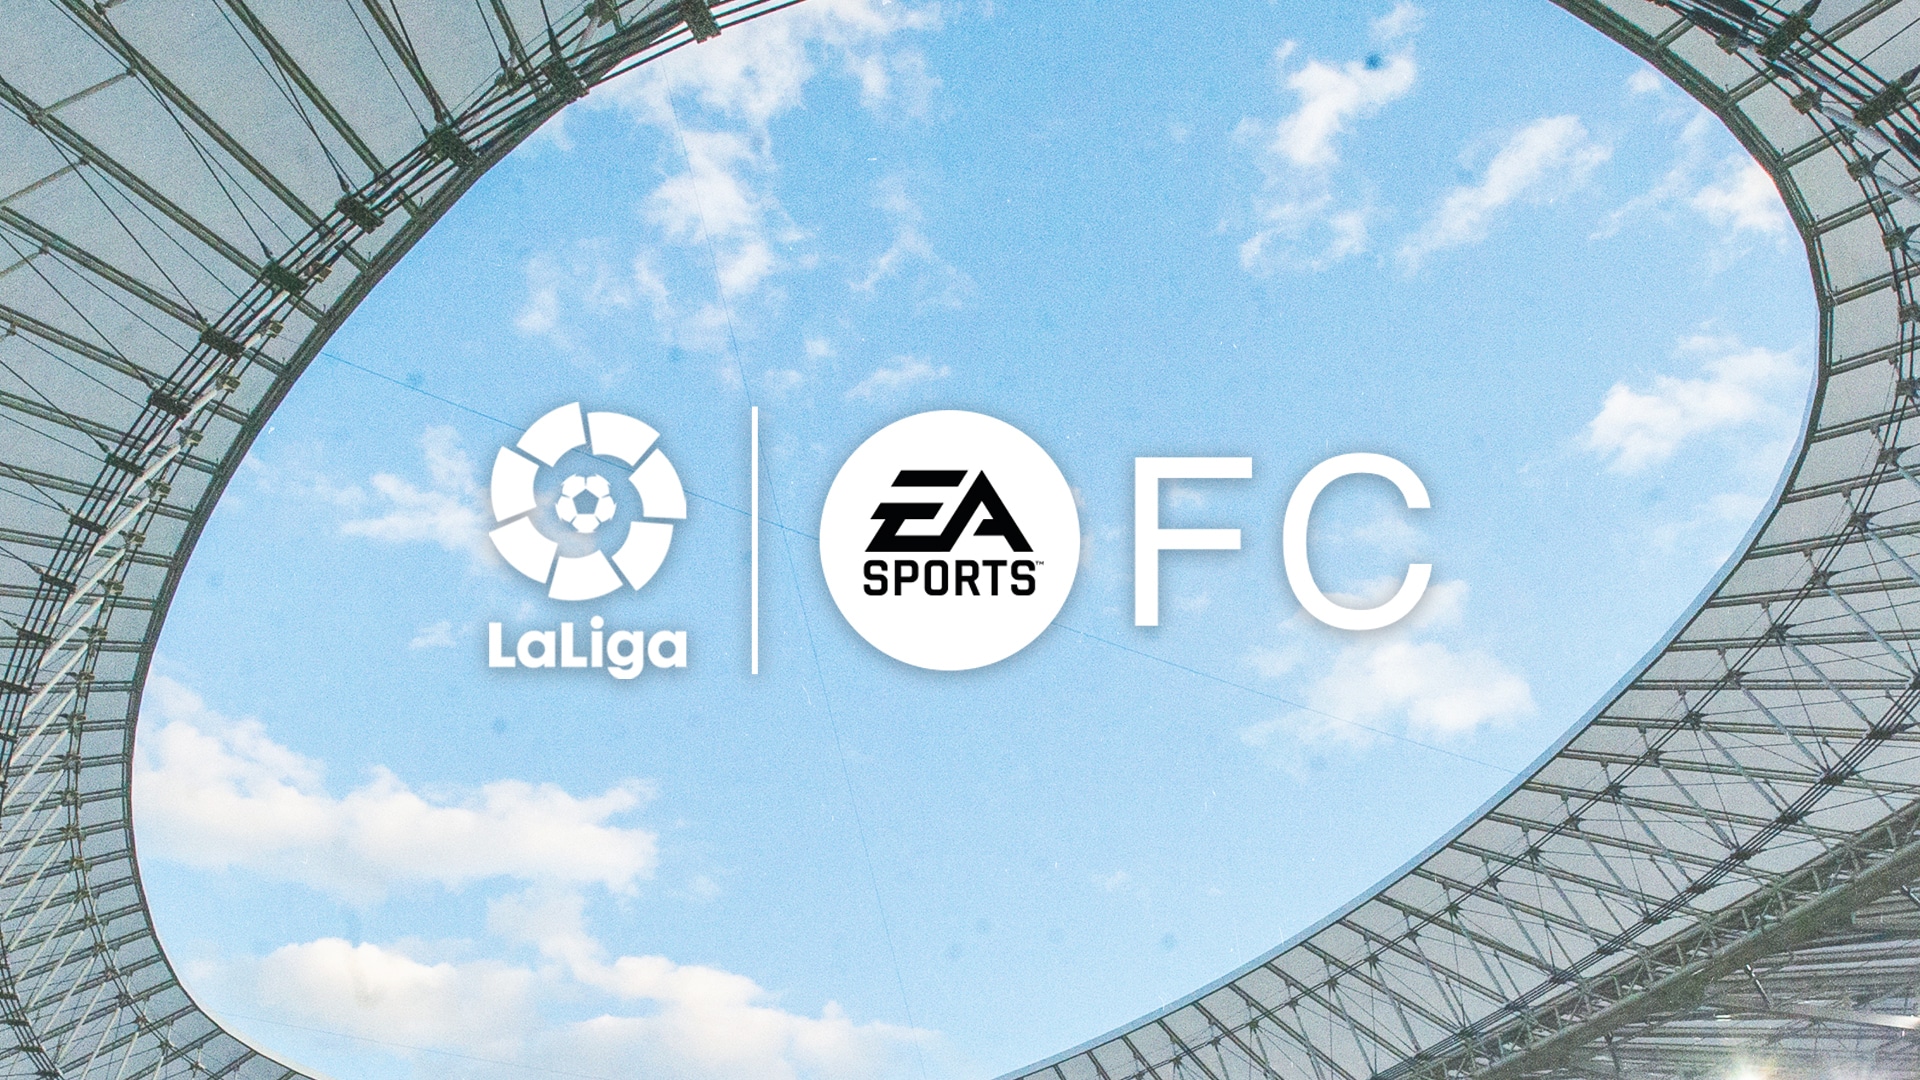 EA SPORTS FC will be the main sponsor of all LaLiga competitions